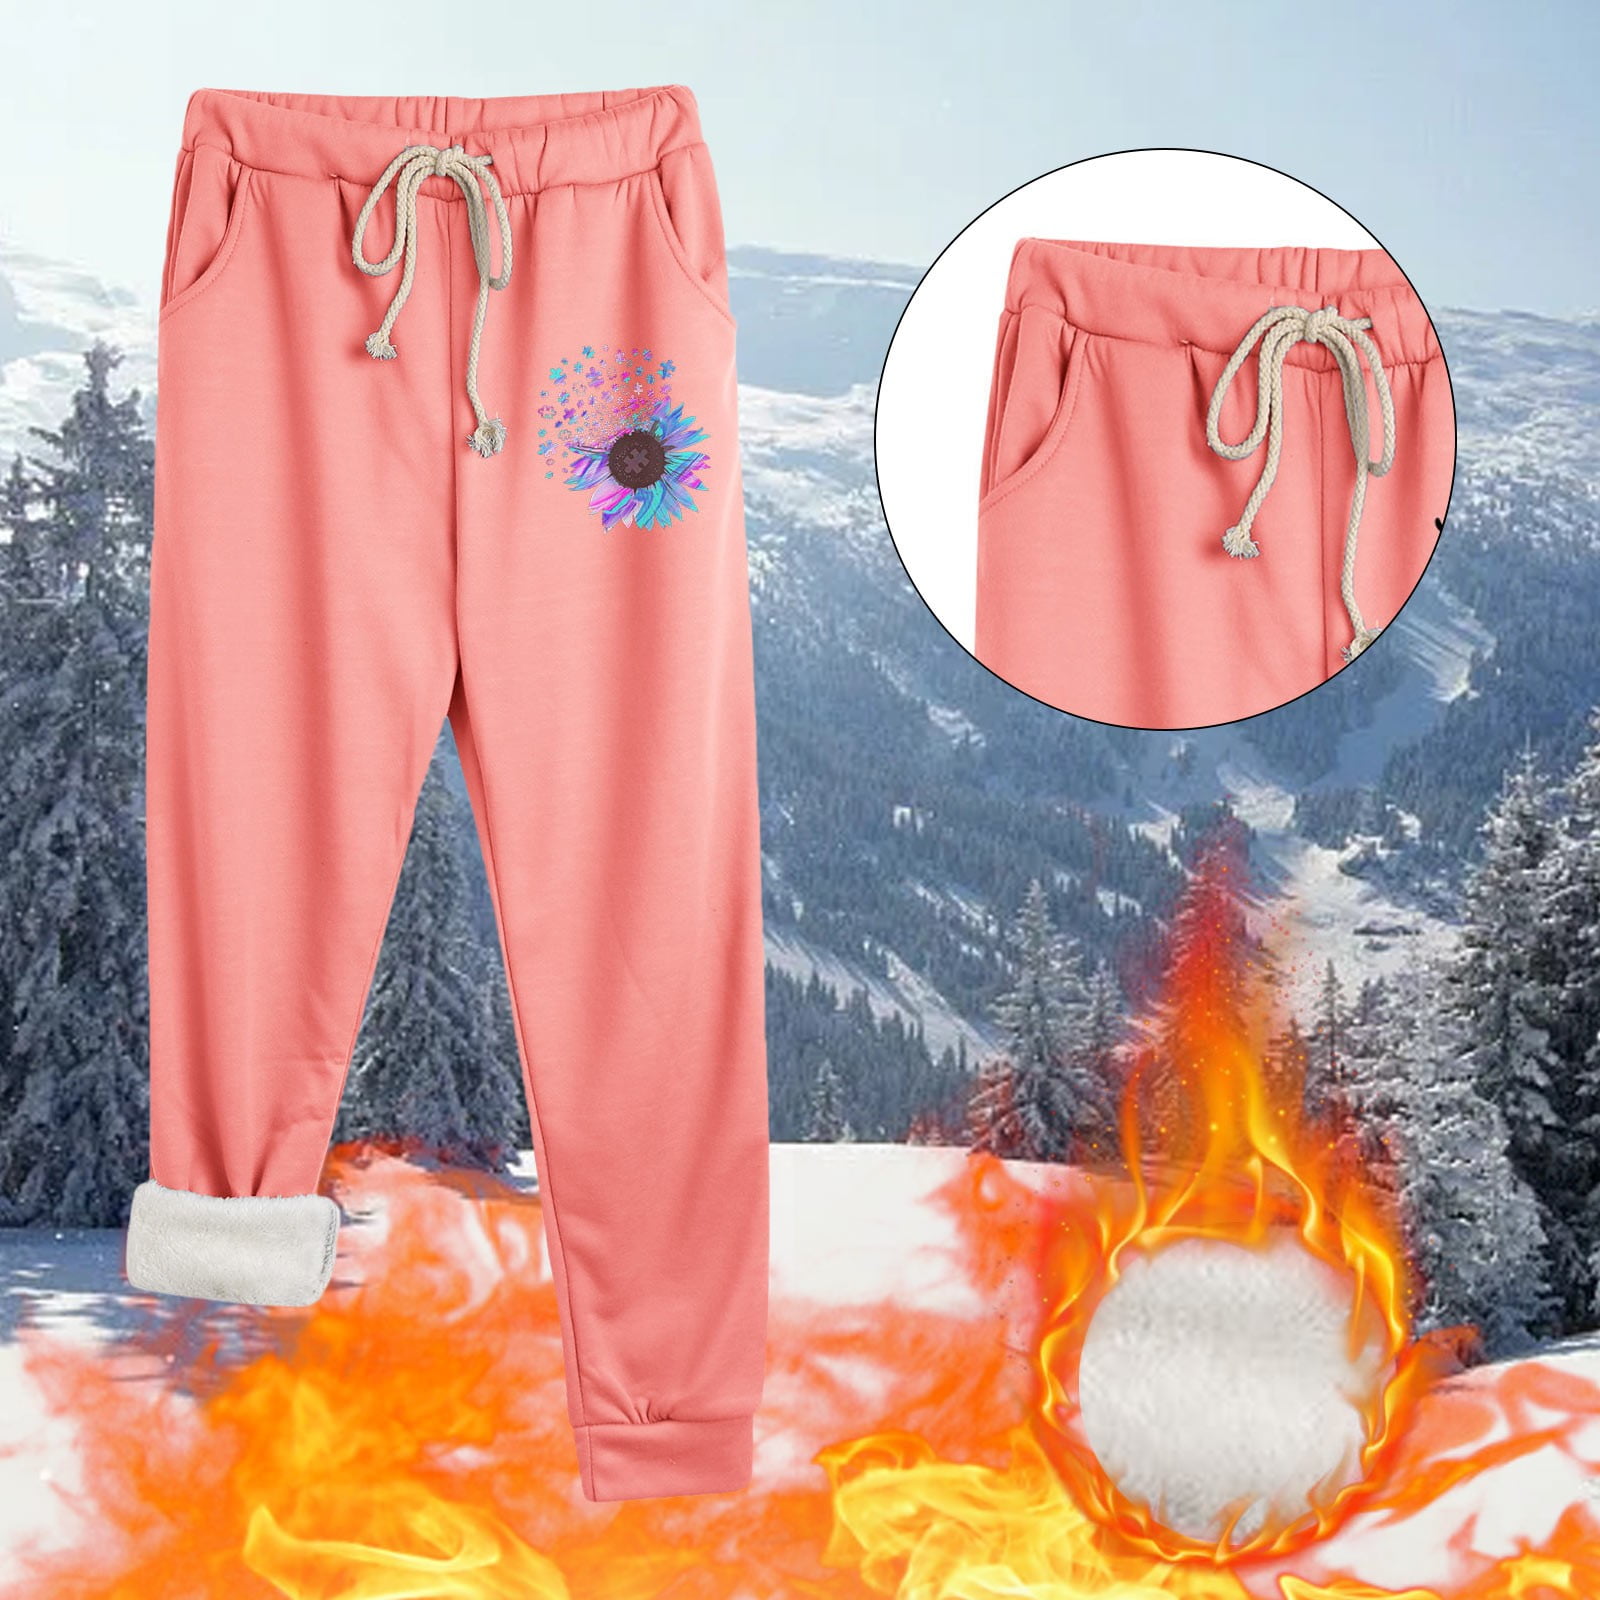 Winter Track Pants - Buy Winter Track Pants online in India